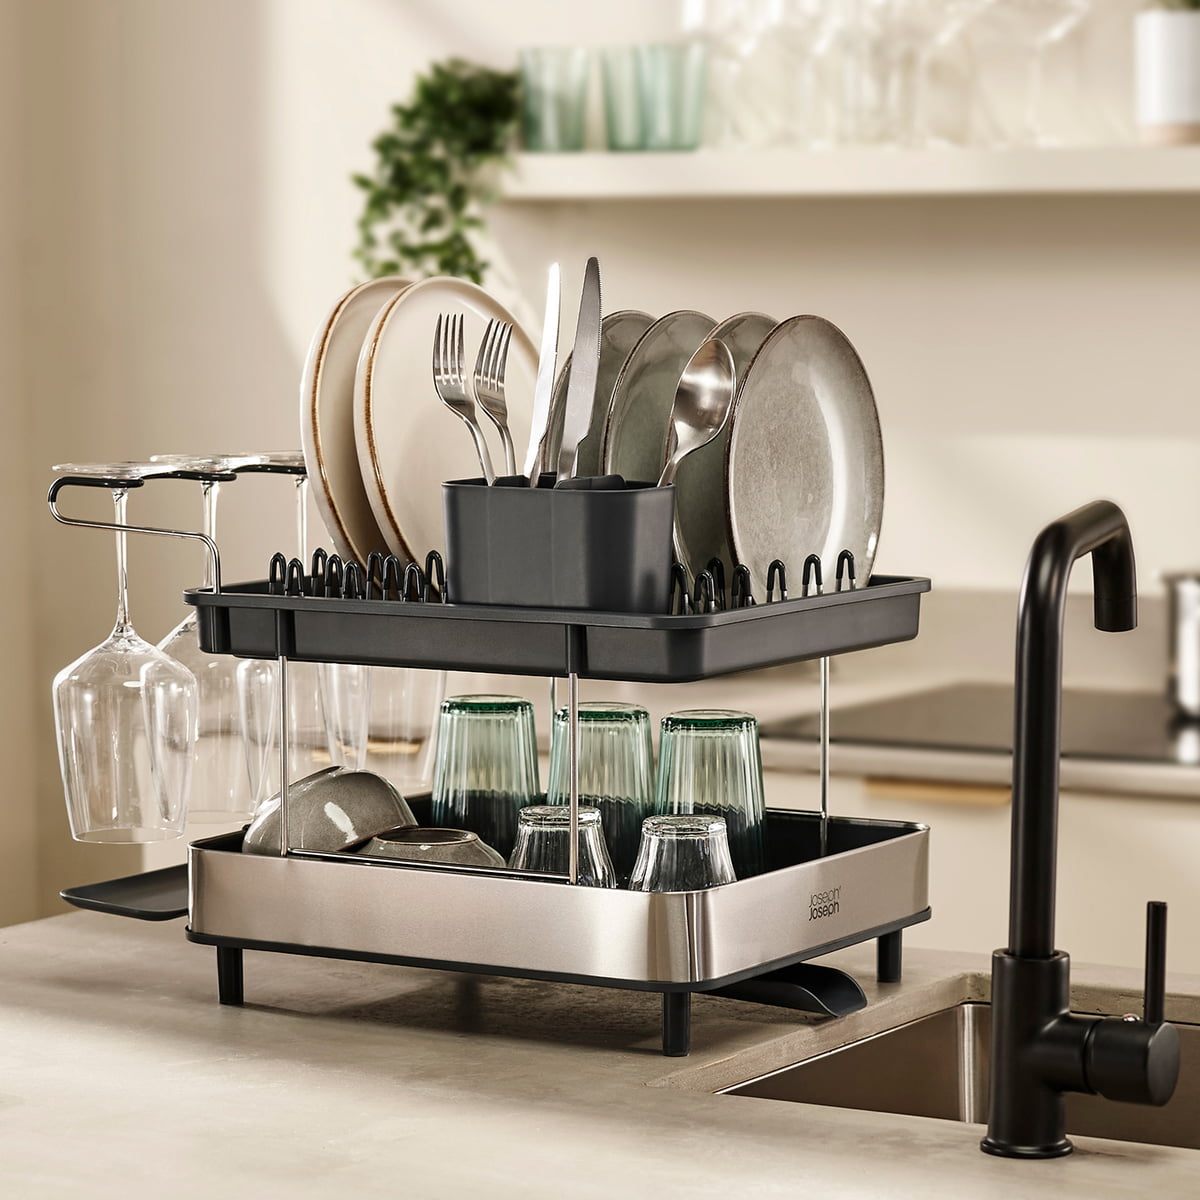 Dish rack: This Joseph Joseph expandable rack is at its lowest price ever